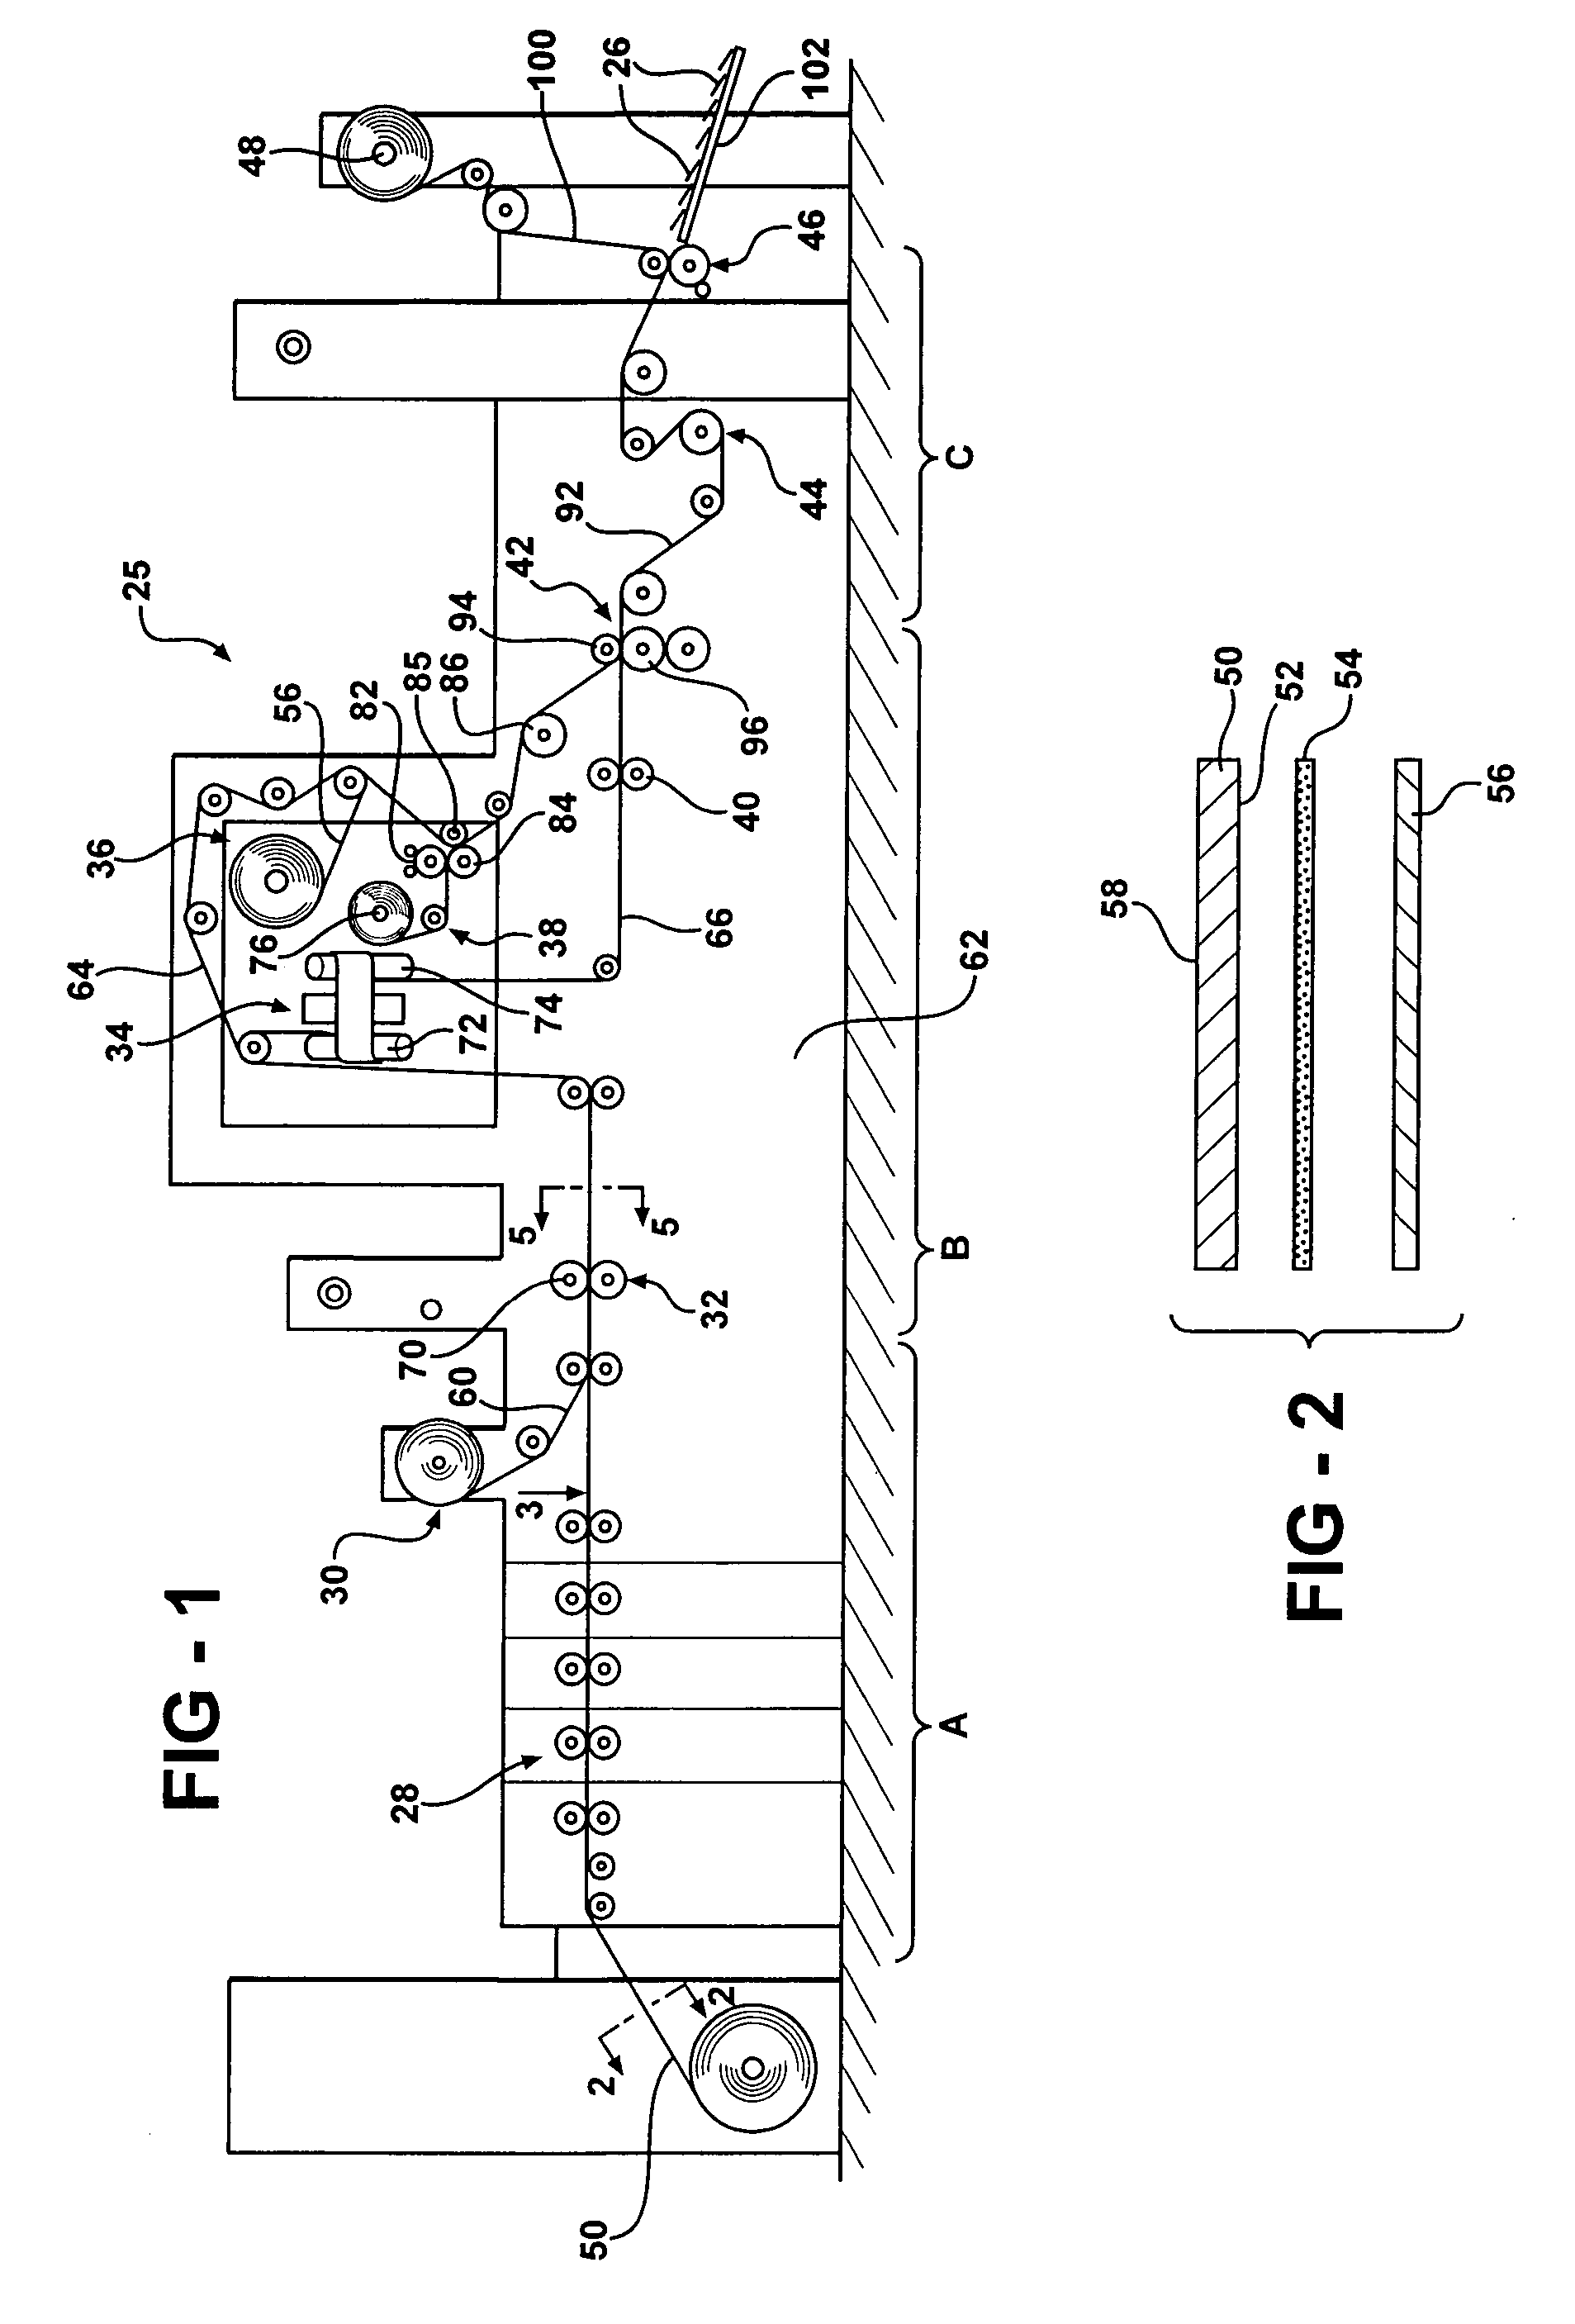 Method of manufacturing an article having a radio frequency identification (RFID) device